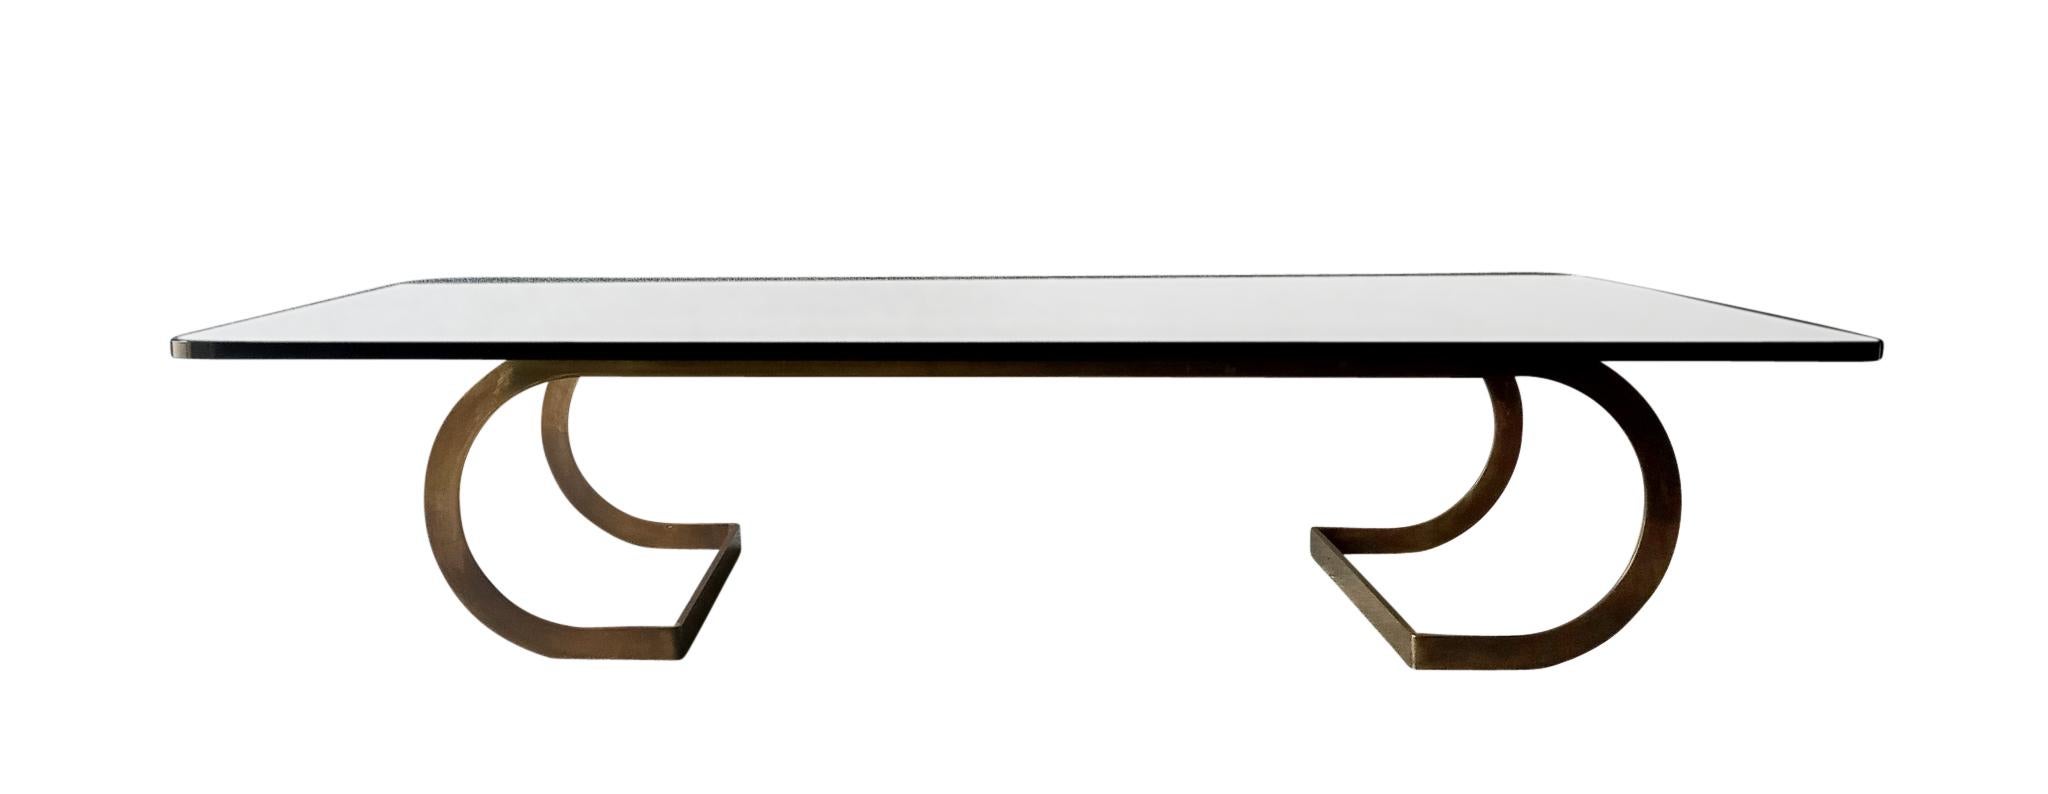 A superb minimalist profile coffee or cocktail table by the legendary American Designer, Milo Baughman. The hefty bronzed-steel base and 3/4